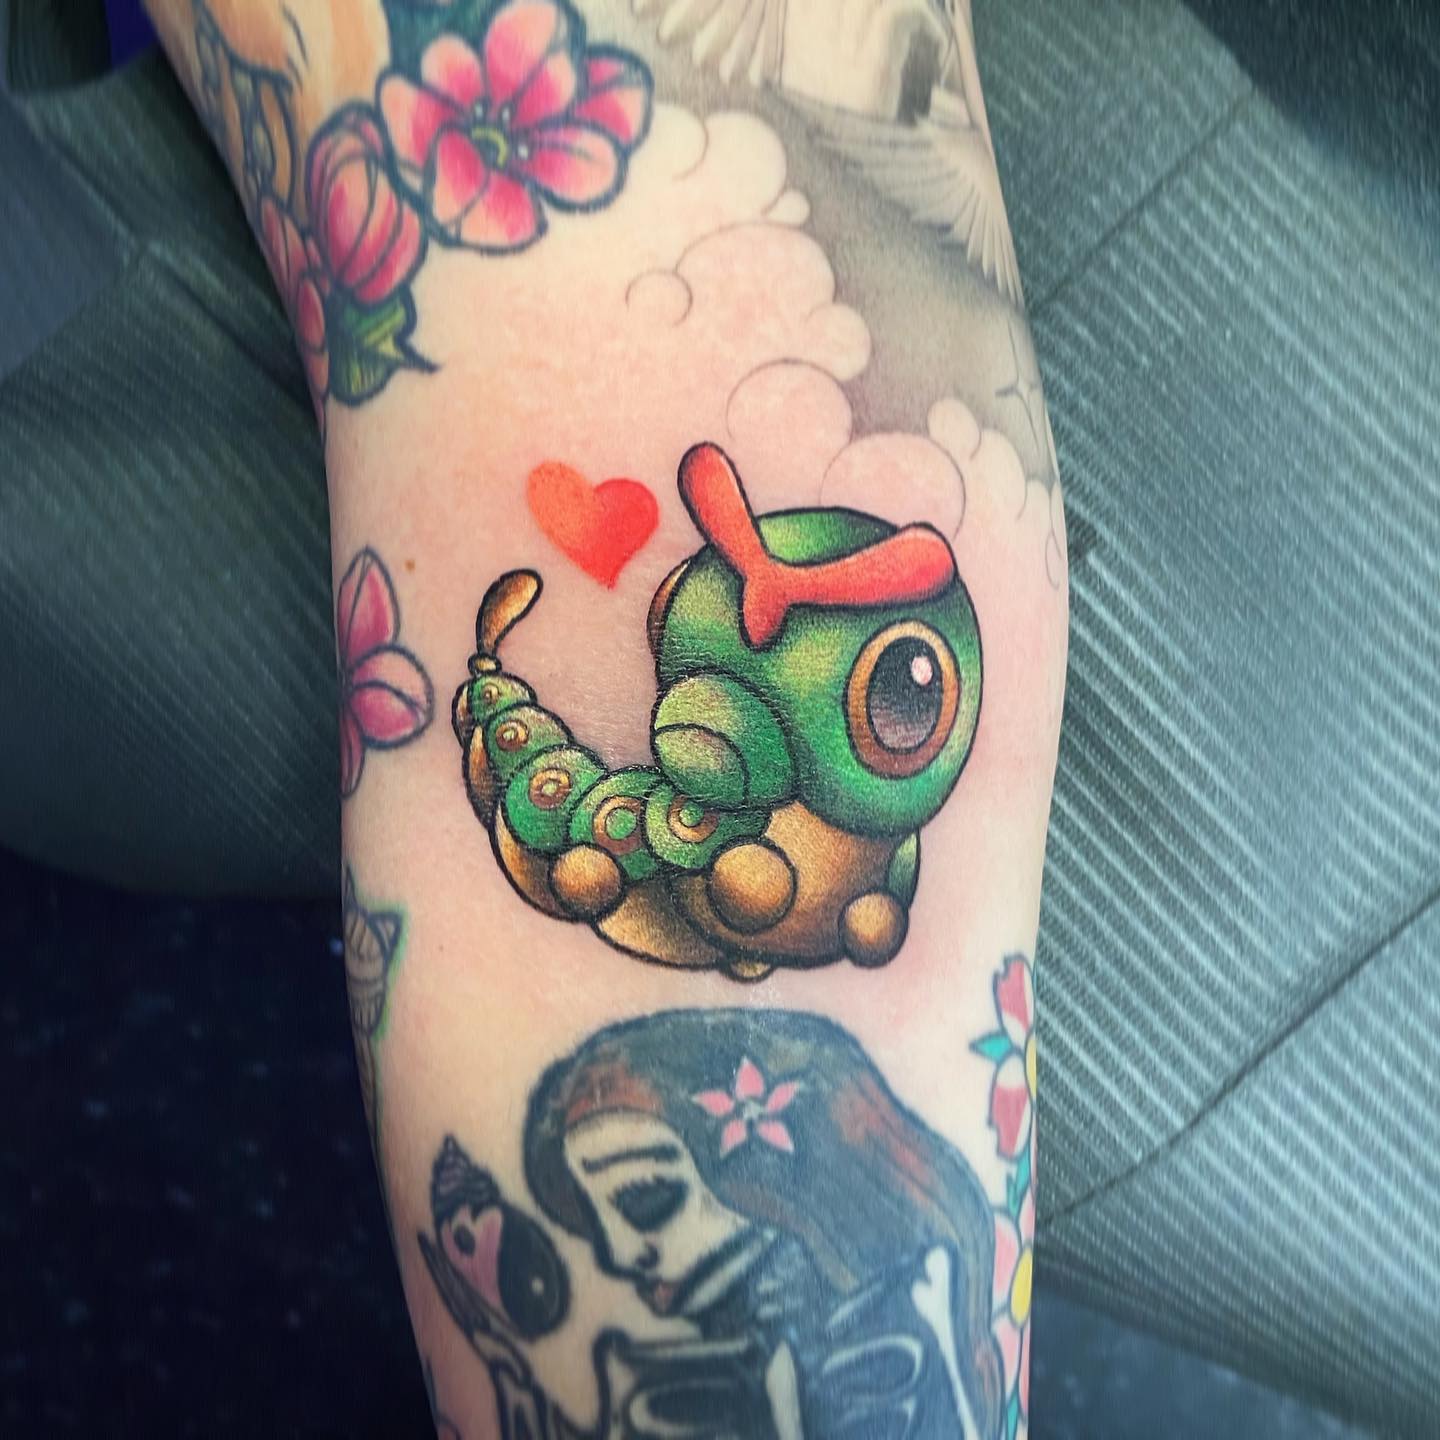 Caterpie tattoos are a popular choice for people who want to get inked but aren't quite sure what they want, or for people who just love the cute little bug. With its uniqueness among other Pokemon because of its appearance, caterpies are a great tattoo idea.